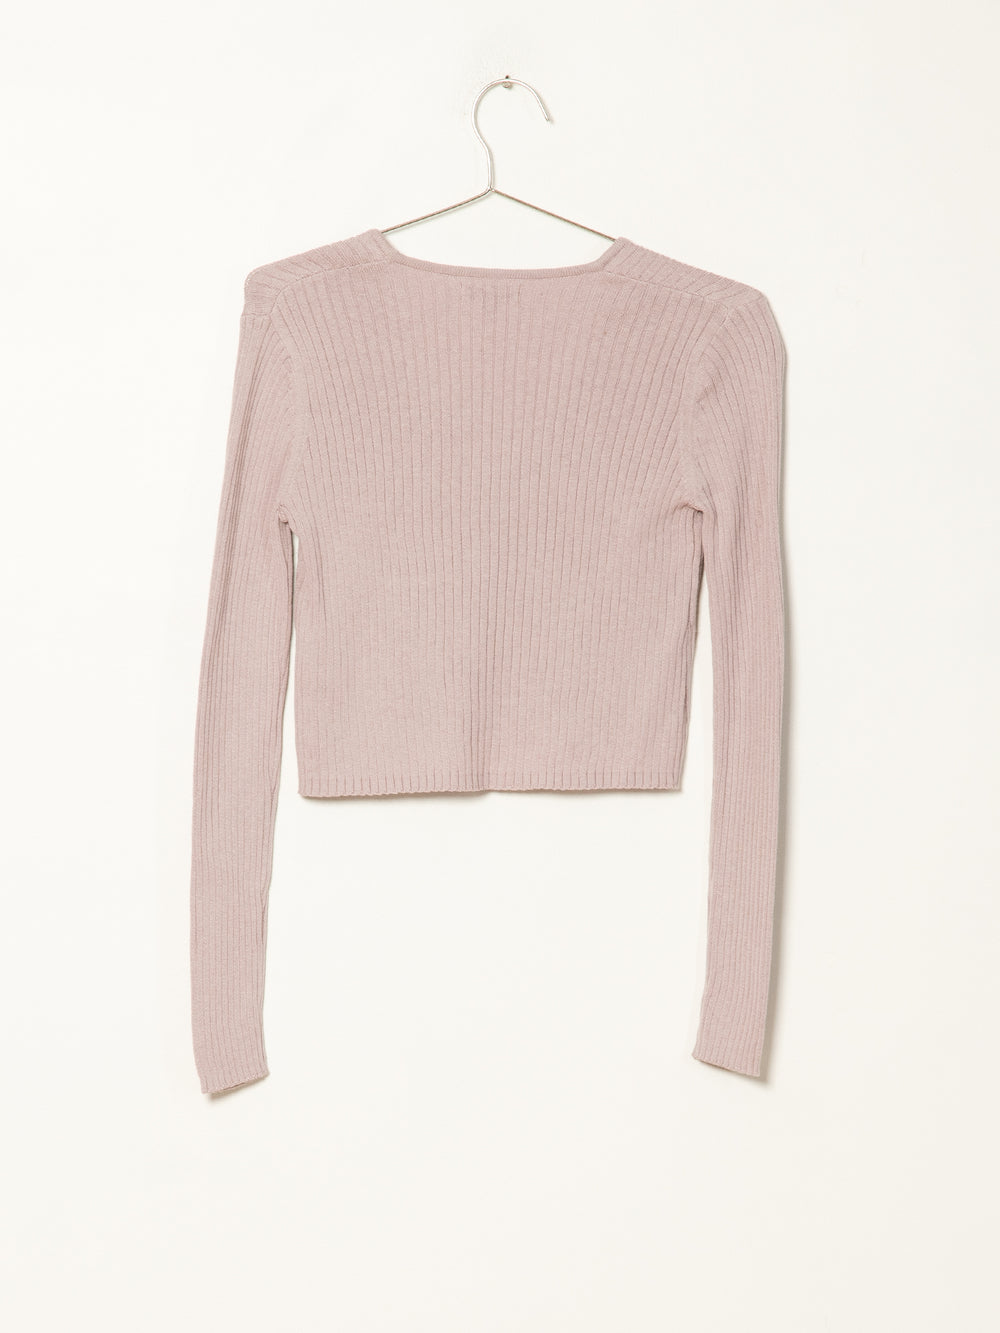 HARLOW WHITNEY LONG SLEEVE TEE UP - DÉSTOCKAGE